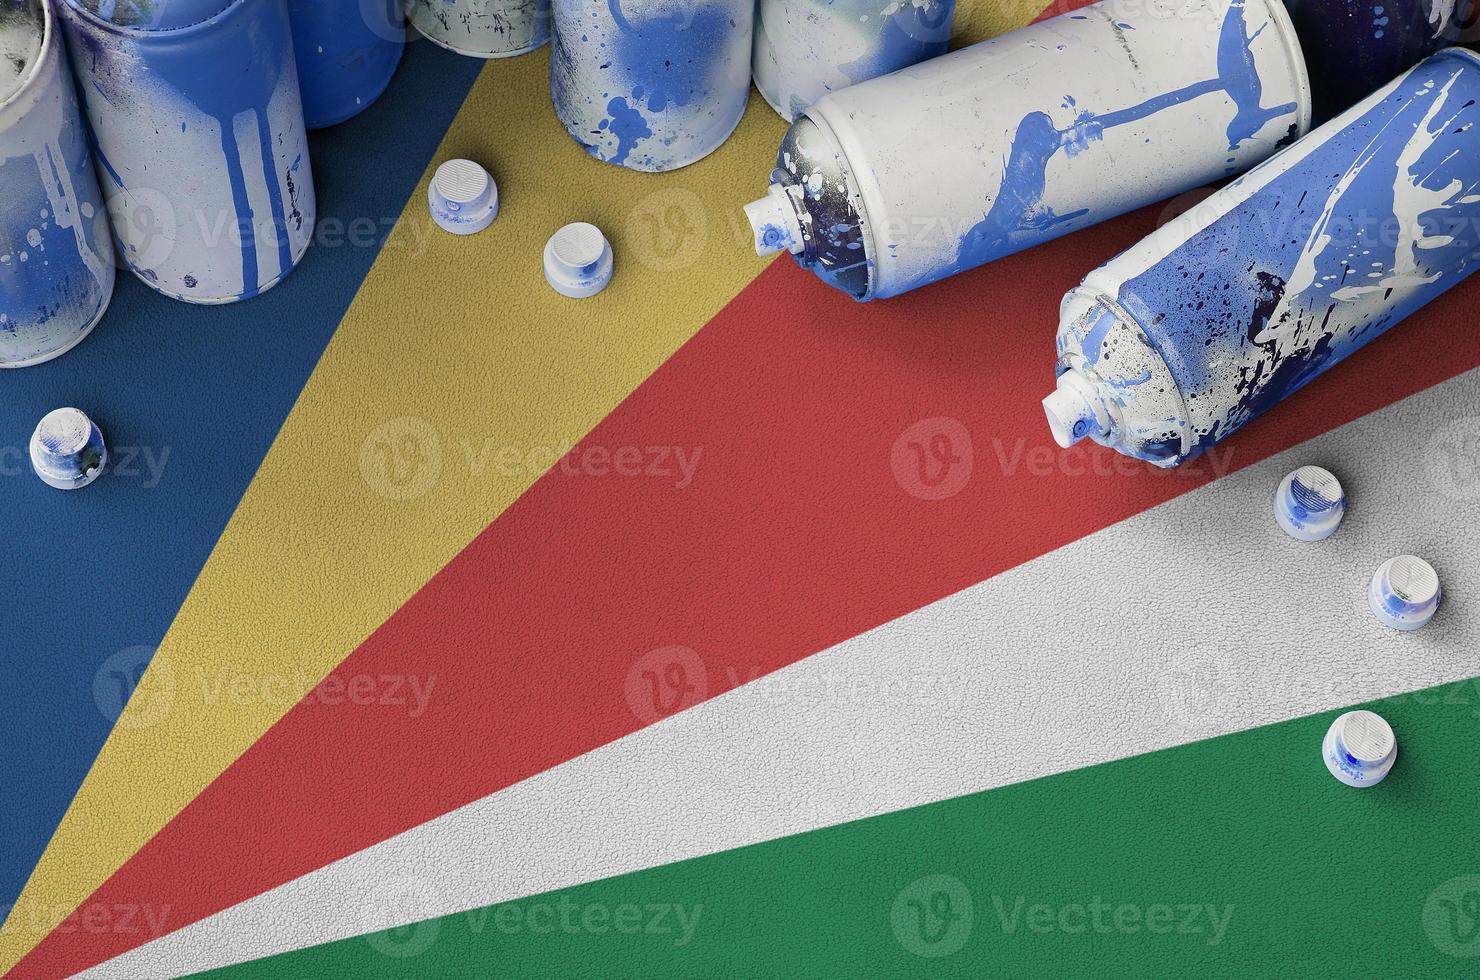 Seychelles flag and few used aerosol spray cans for graffiti painting. Street art culture concept photo